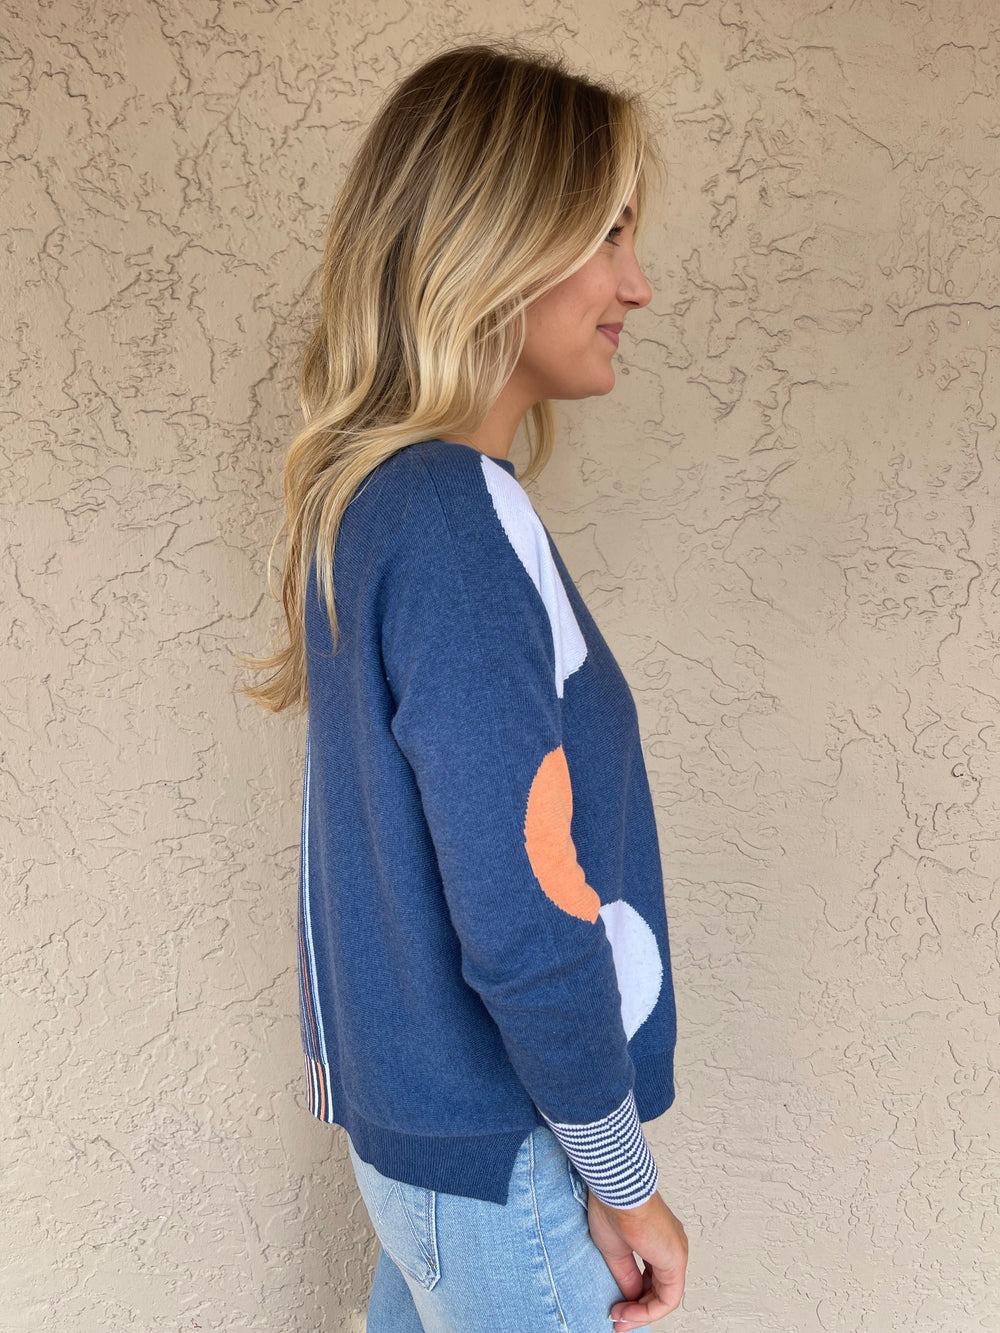 Zaket and Plover Spot Sweater - Jean